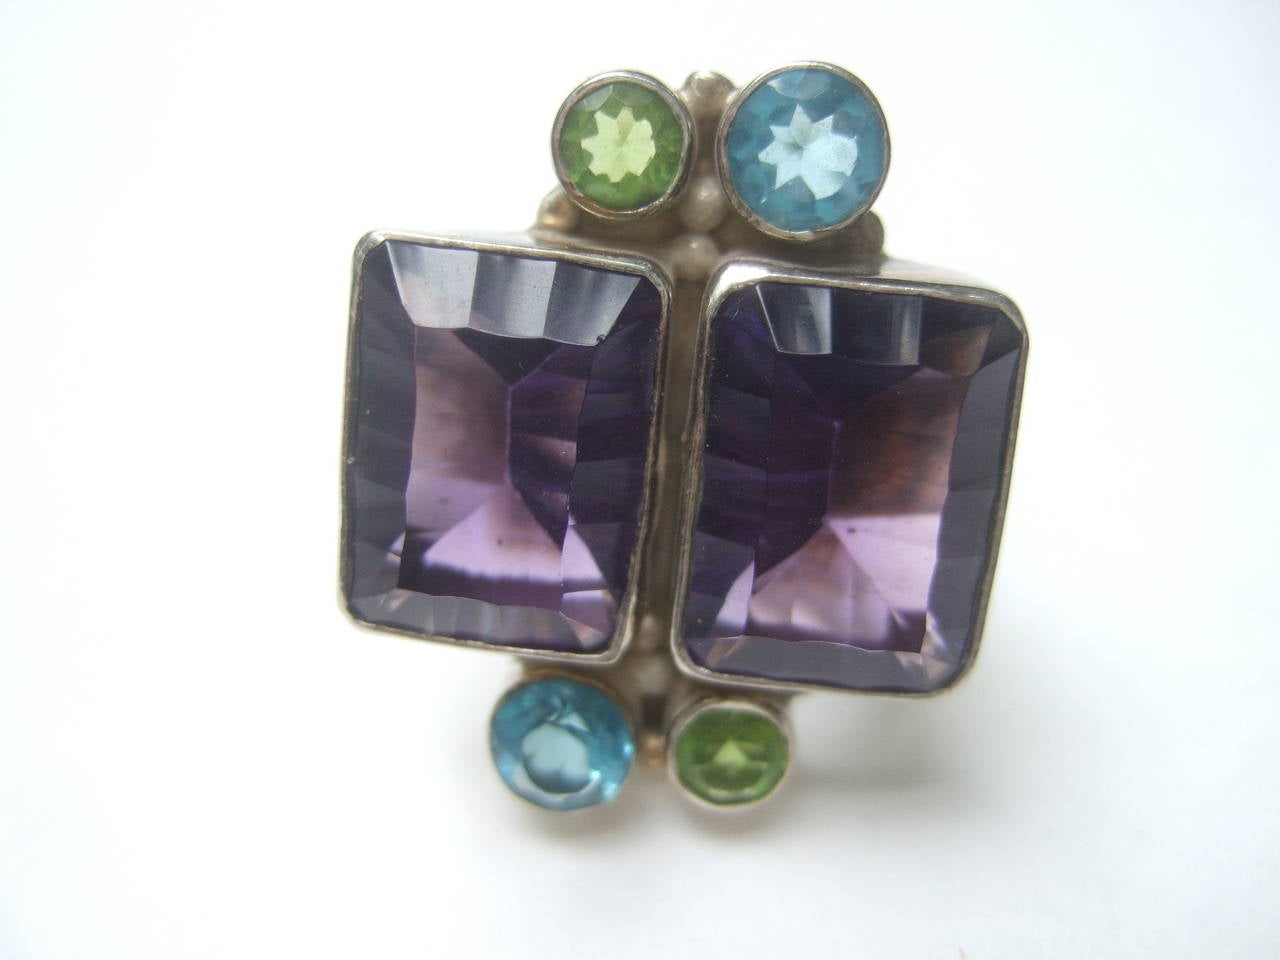 Sterling artisan semi precious amethyst ring Size 8.5
The large scale cocktail style ring is designed 
with two large rectangular amethyst bezel set
crystals

On both sides of the center amethyst settings
are smaller circular aquamarine and